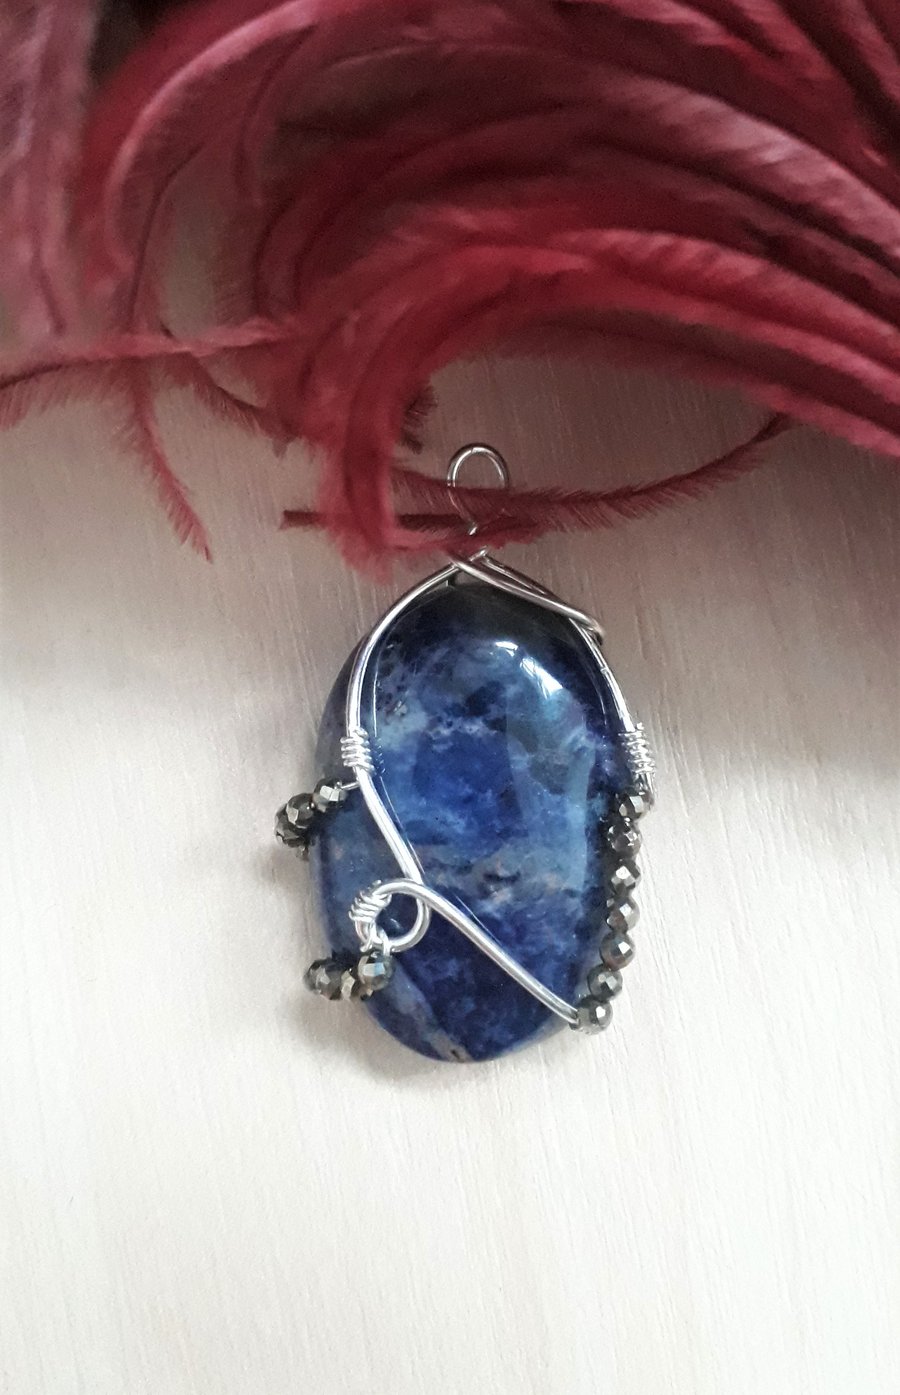 Blue Sodalite Pendant Wire Wrapped in Sterling Silver with Pyrites Beads